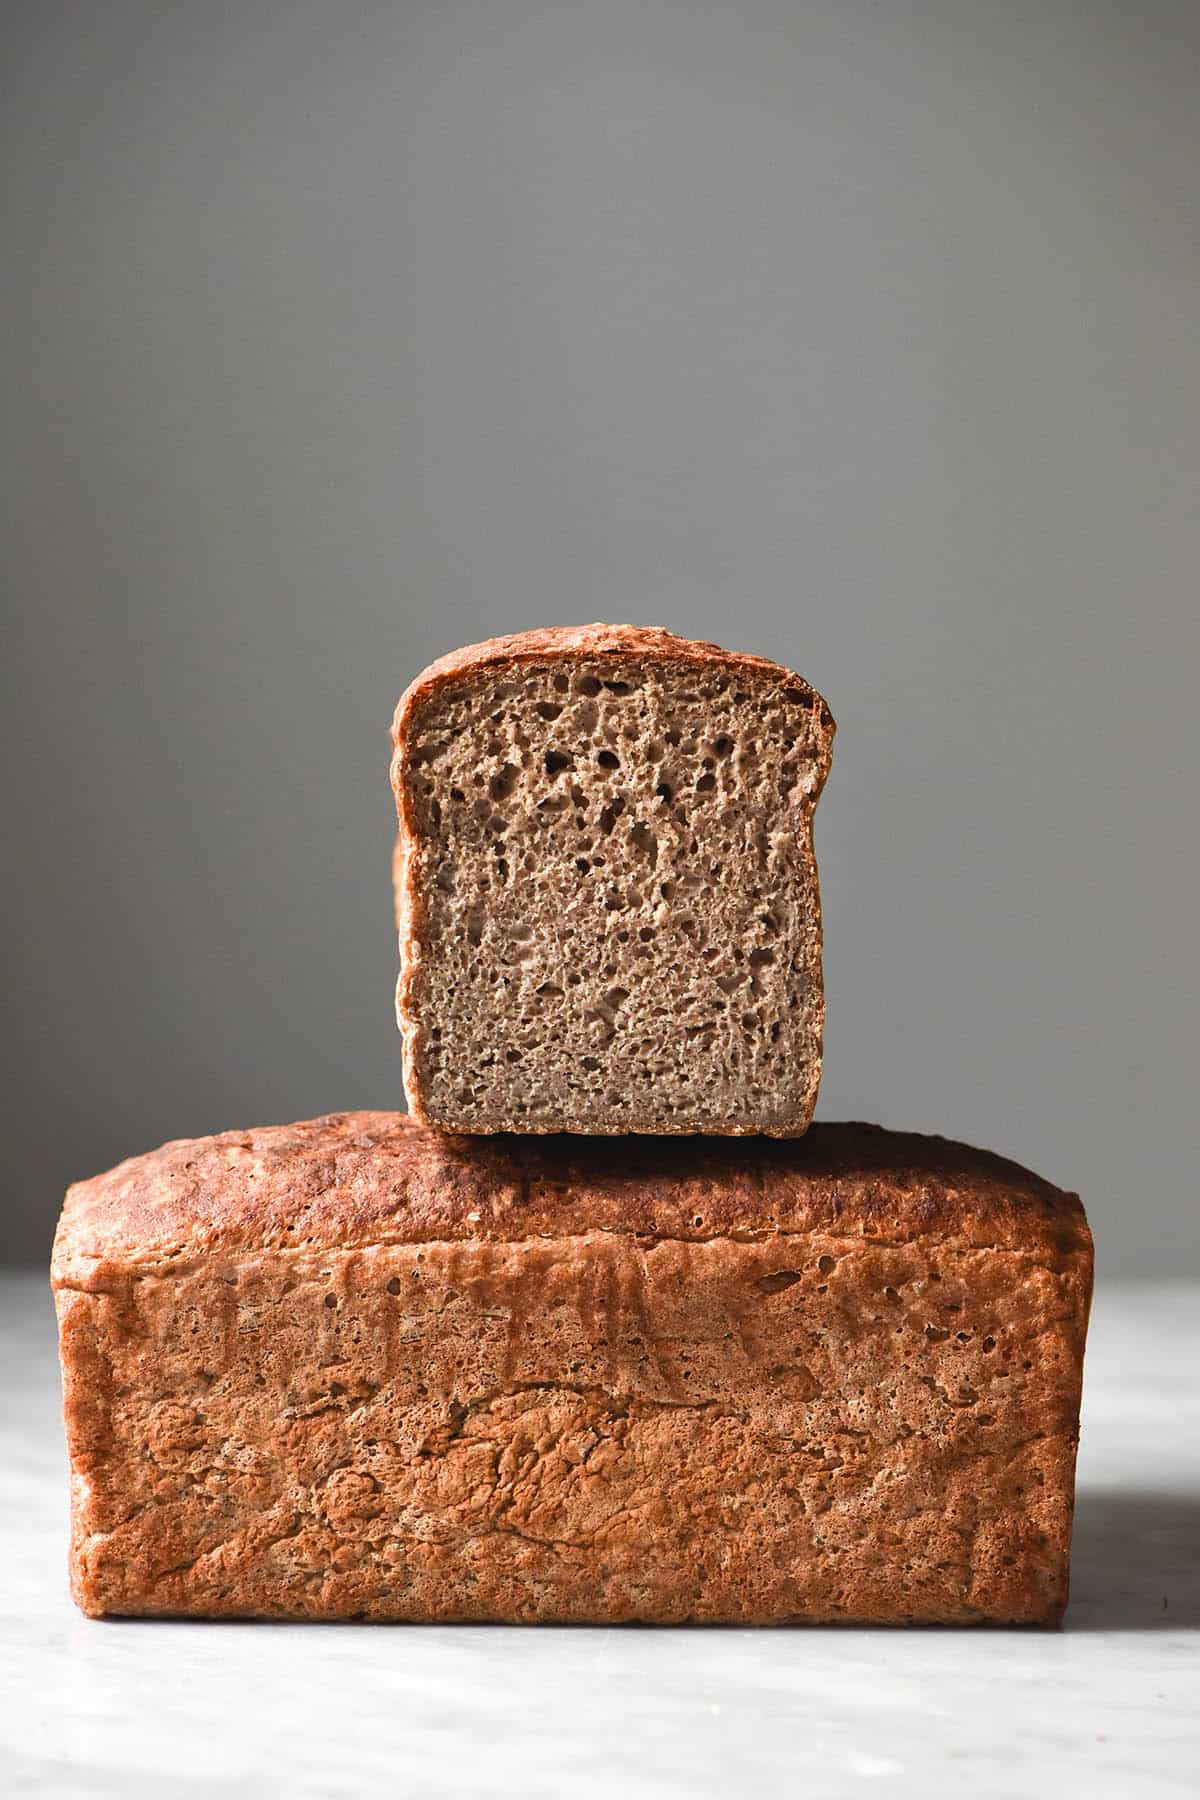 A side on view of a gluten free buckwheat bread loaf on a white marble table. A second loaf sits in the middle of the loaf, facing the camera. The second loaf has been sliced to reveal the inner crumb of the bread. 